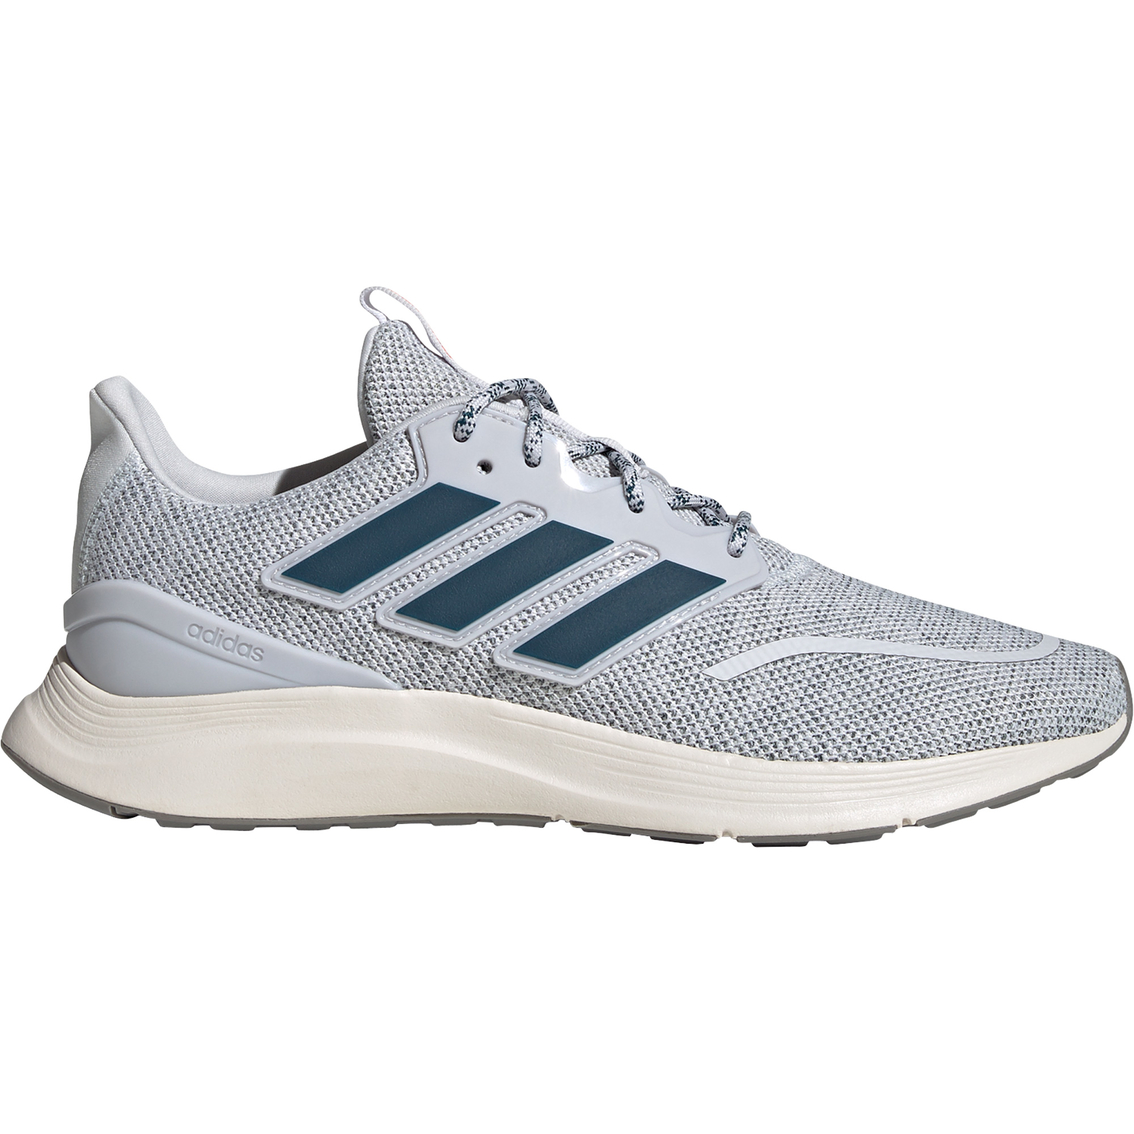 Adidas Men's Energy Falcon Running Shoes - Image 2 of 8